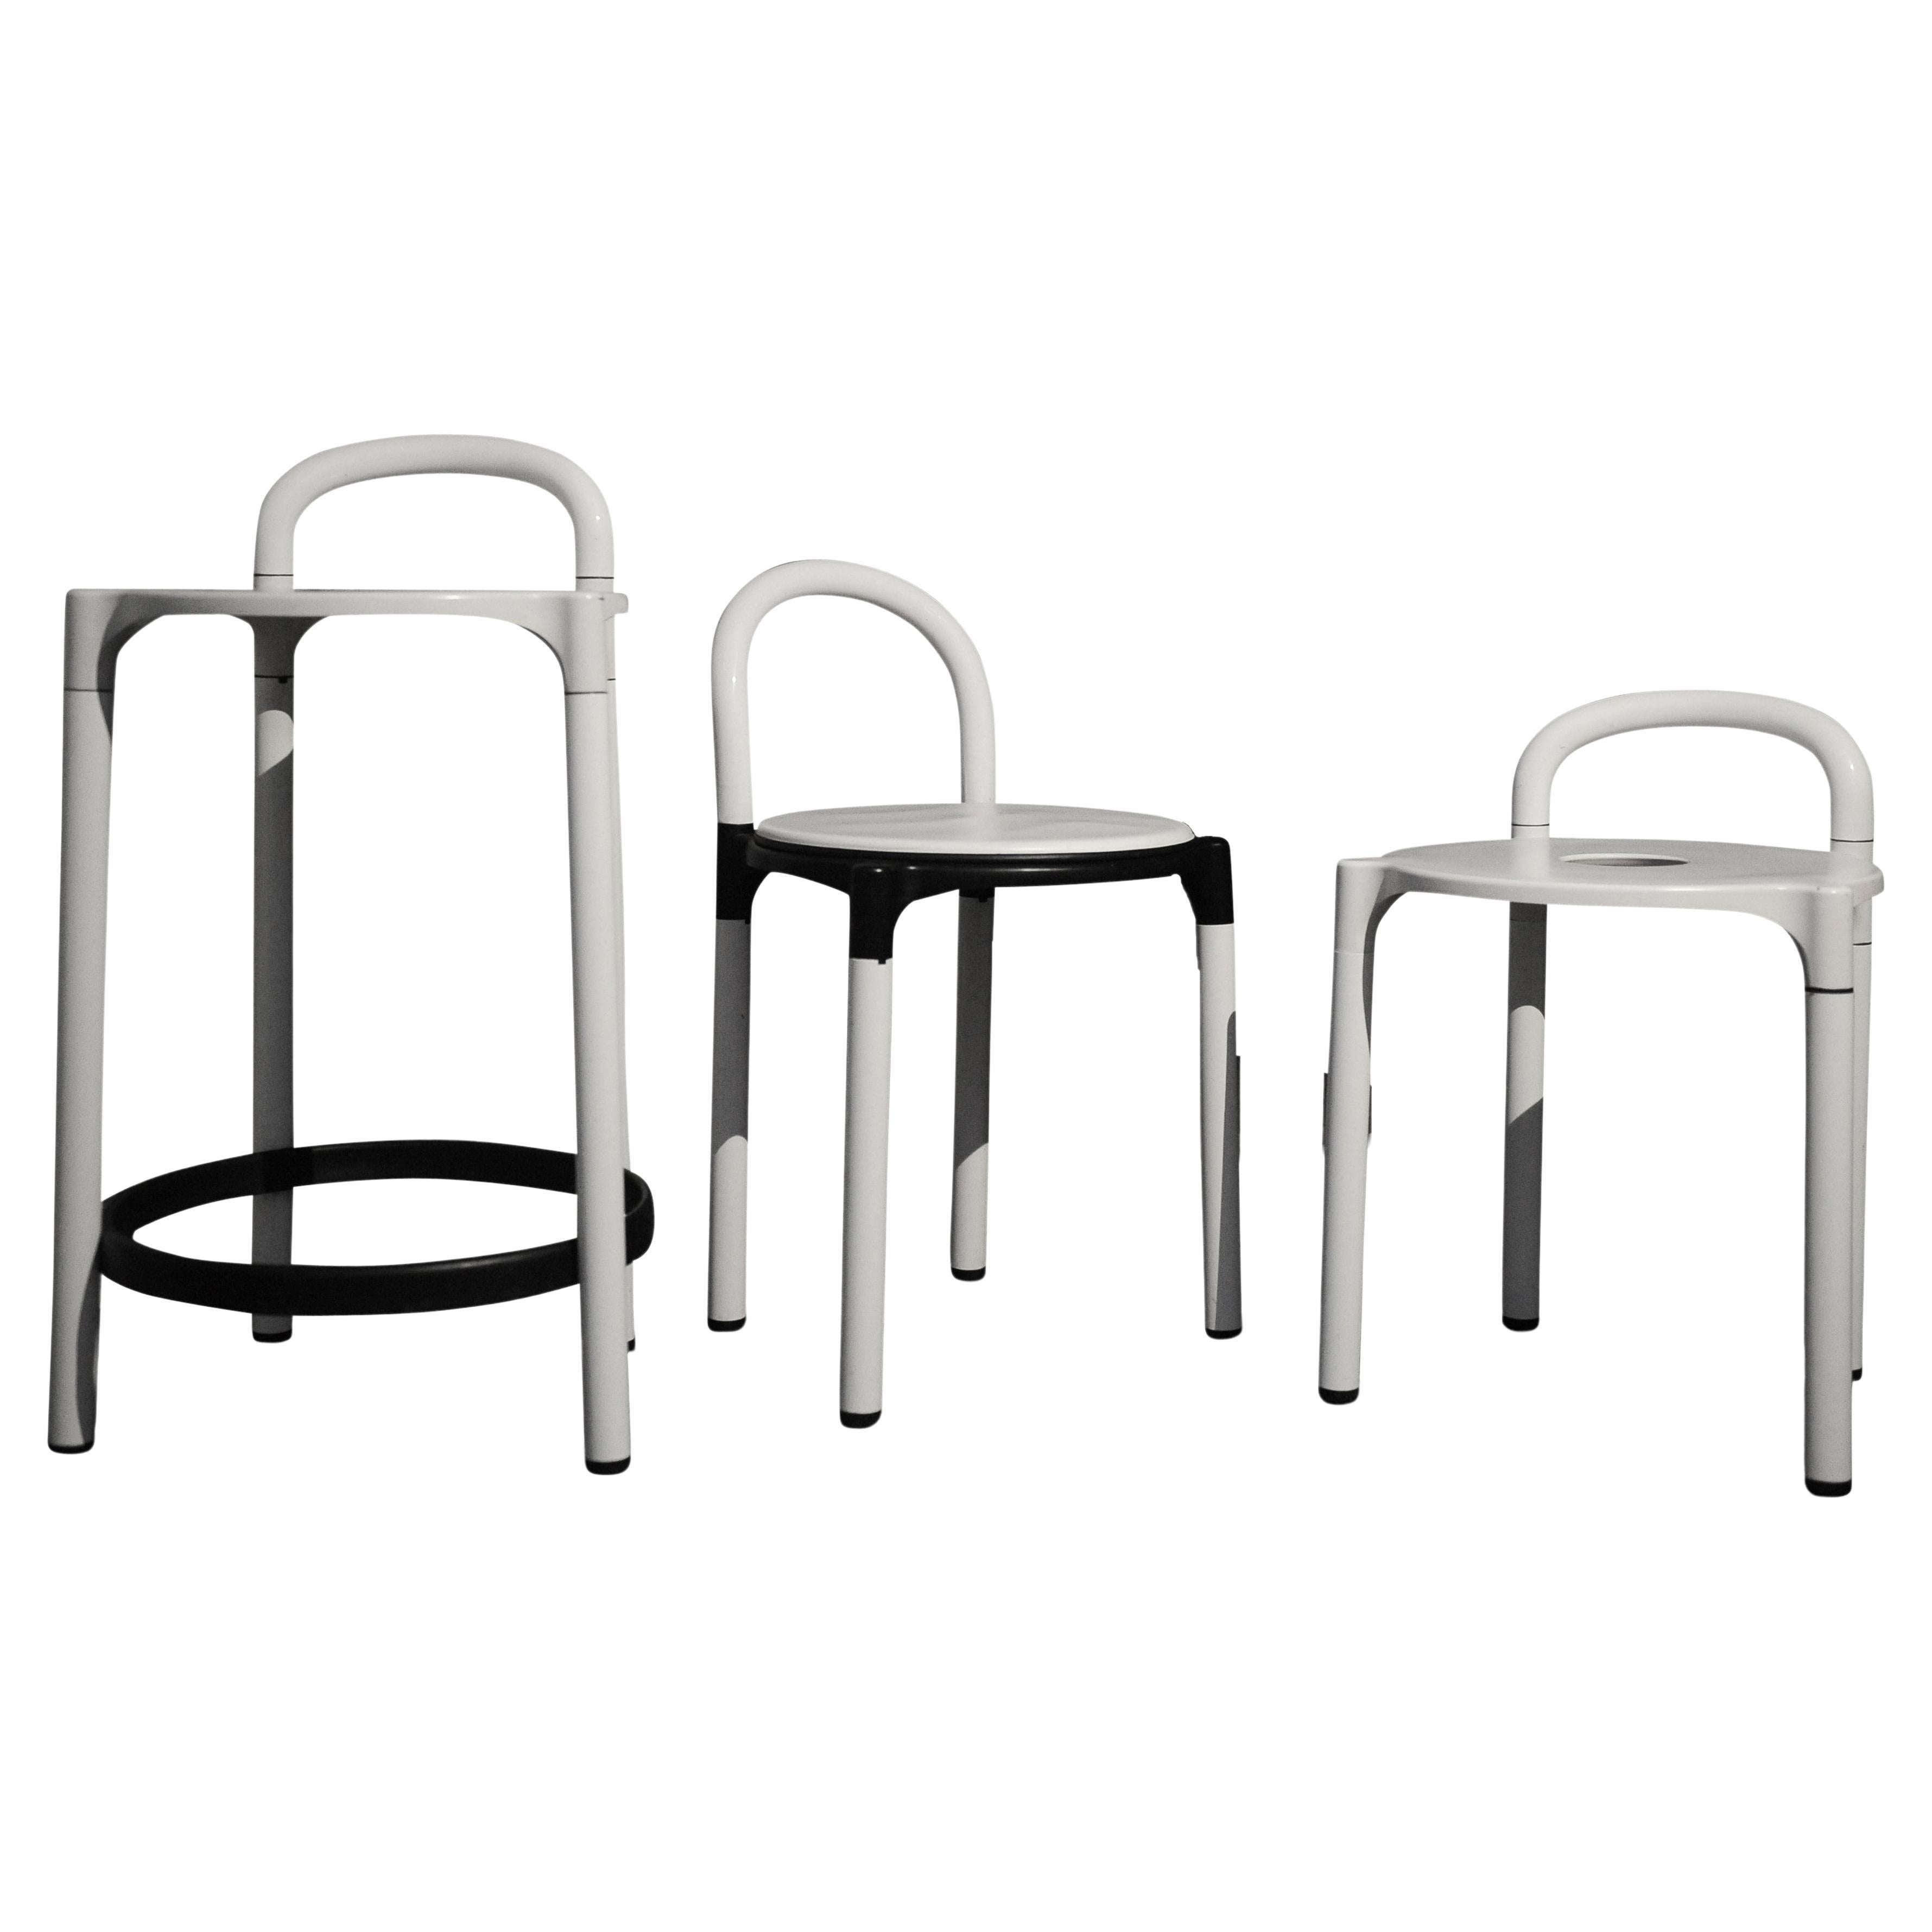 A Set of Three Monochrome Postmodern Stools by Anna Castelli Ferrieri for Kartell, Italy, 1980s

Measures: Small Height: 58cm I Width: 41cm I Depth: 41cm
Height to seat: 45cm

LARGER Height: 79cm I Width: 40cm I Depth: 39cm
Height to seat: